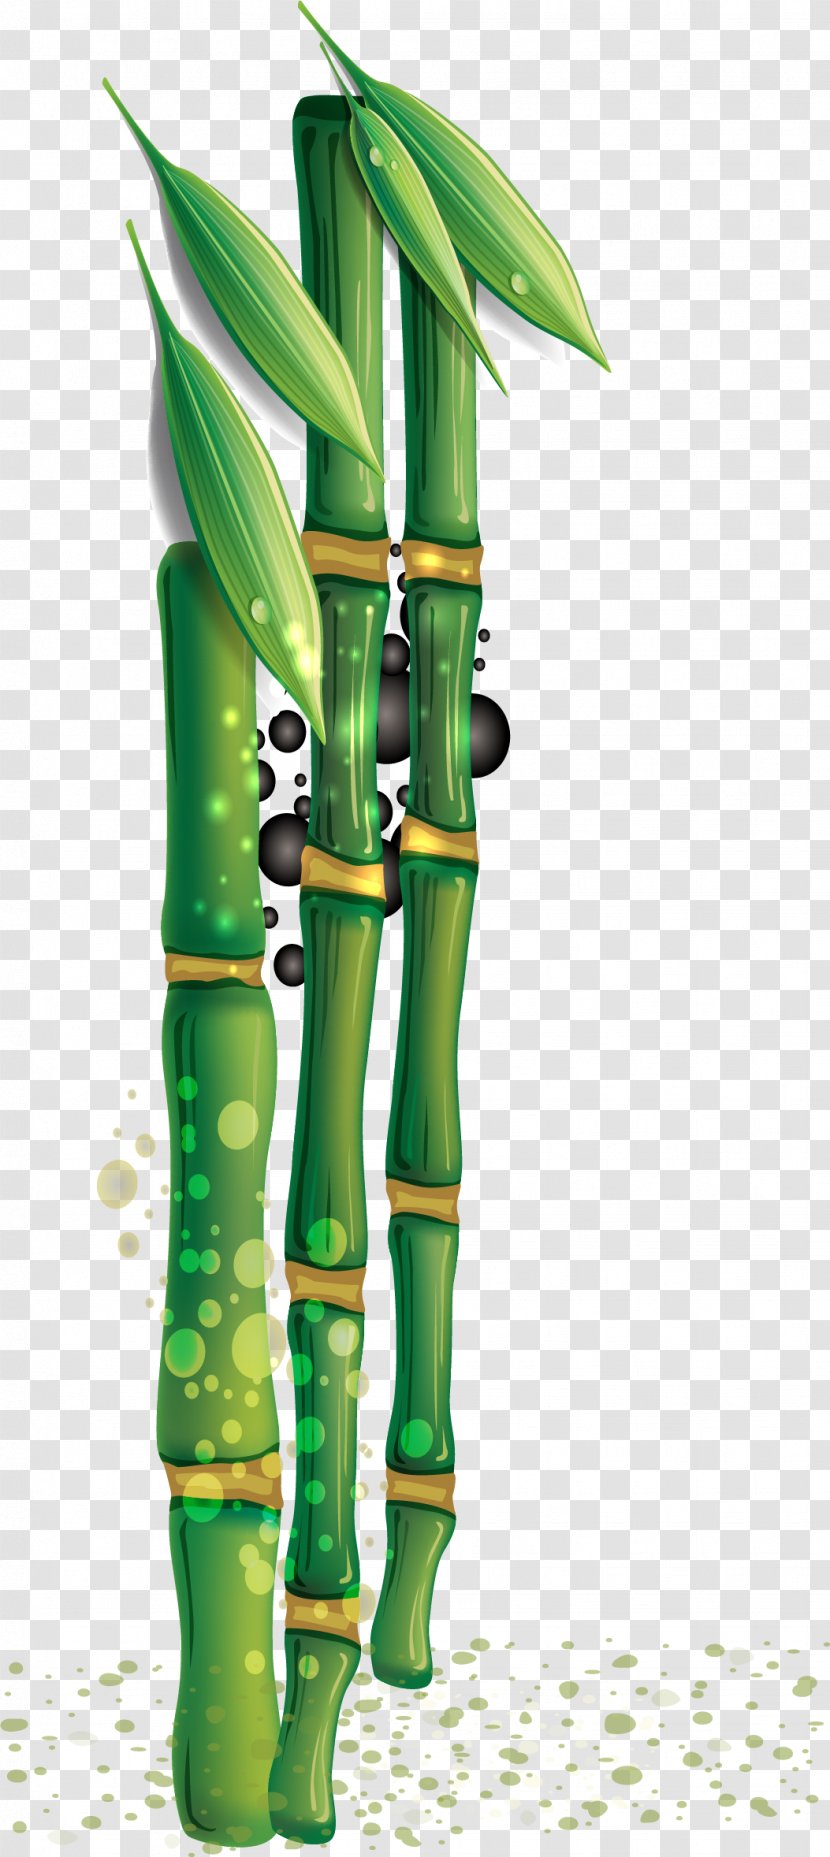 Bamboo Download - Grass - Hand Painted Green Transparent PNG